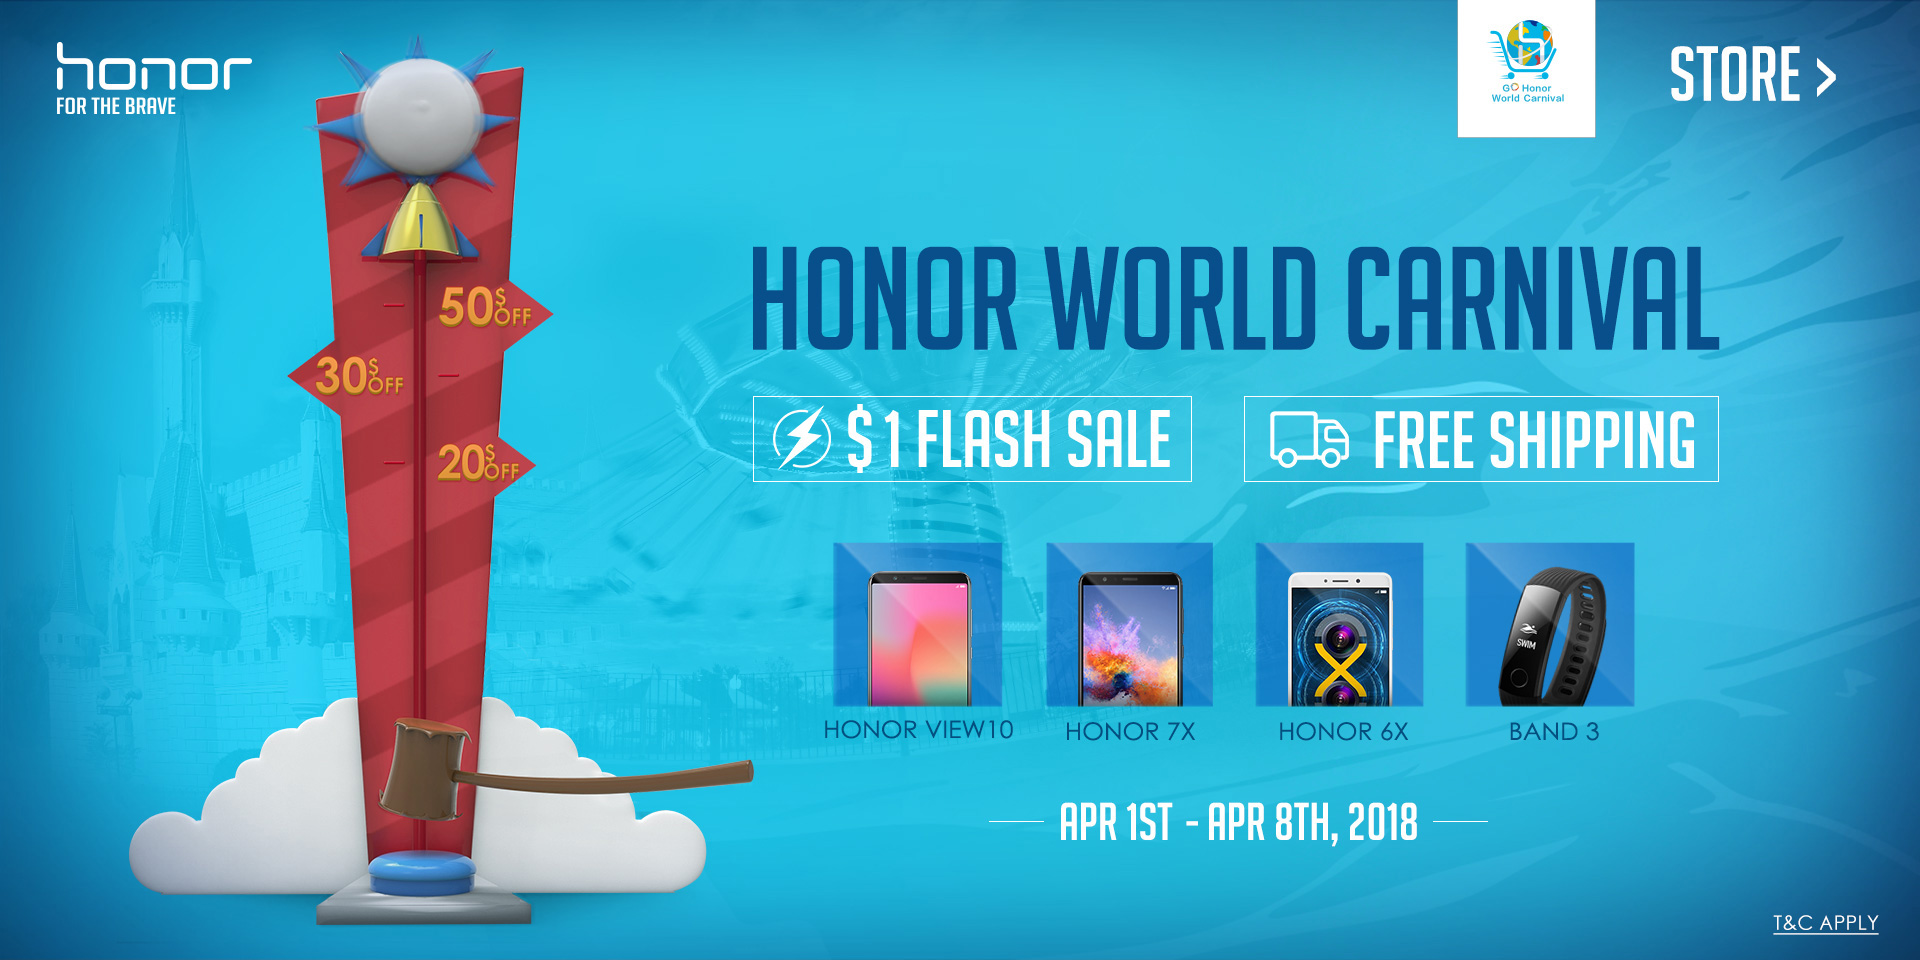 Grab a Honor 7X smartphone for just $1 at tomorrow's flash sale 4